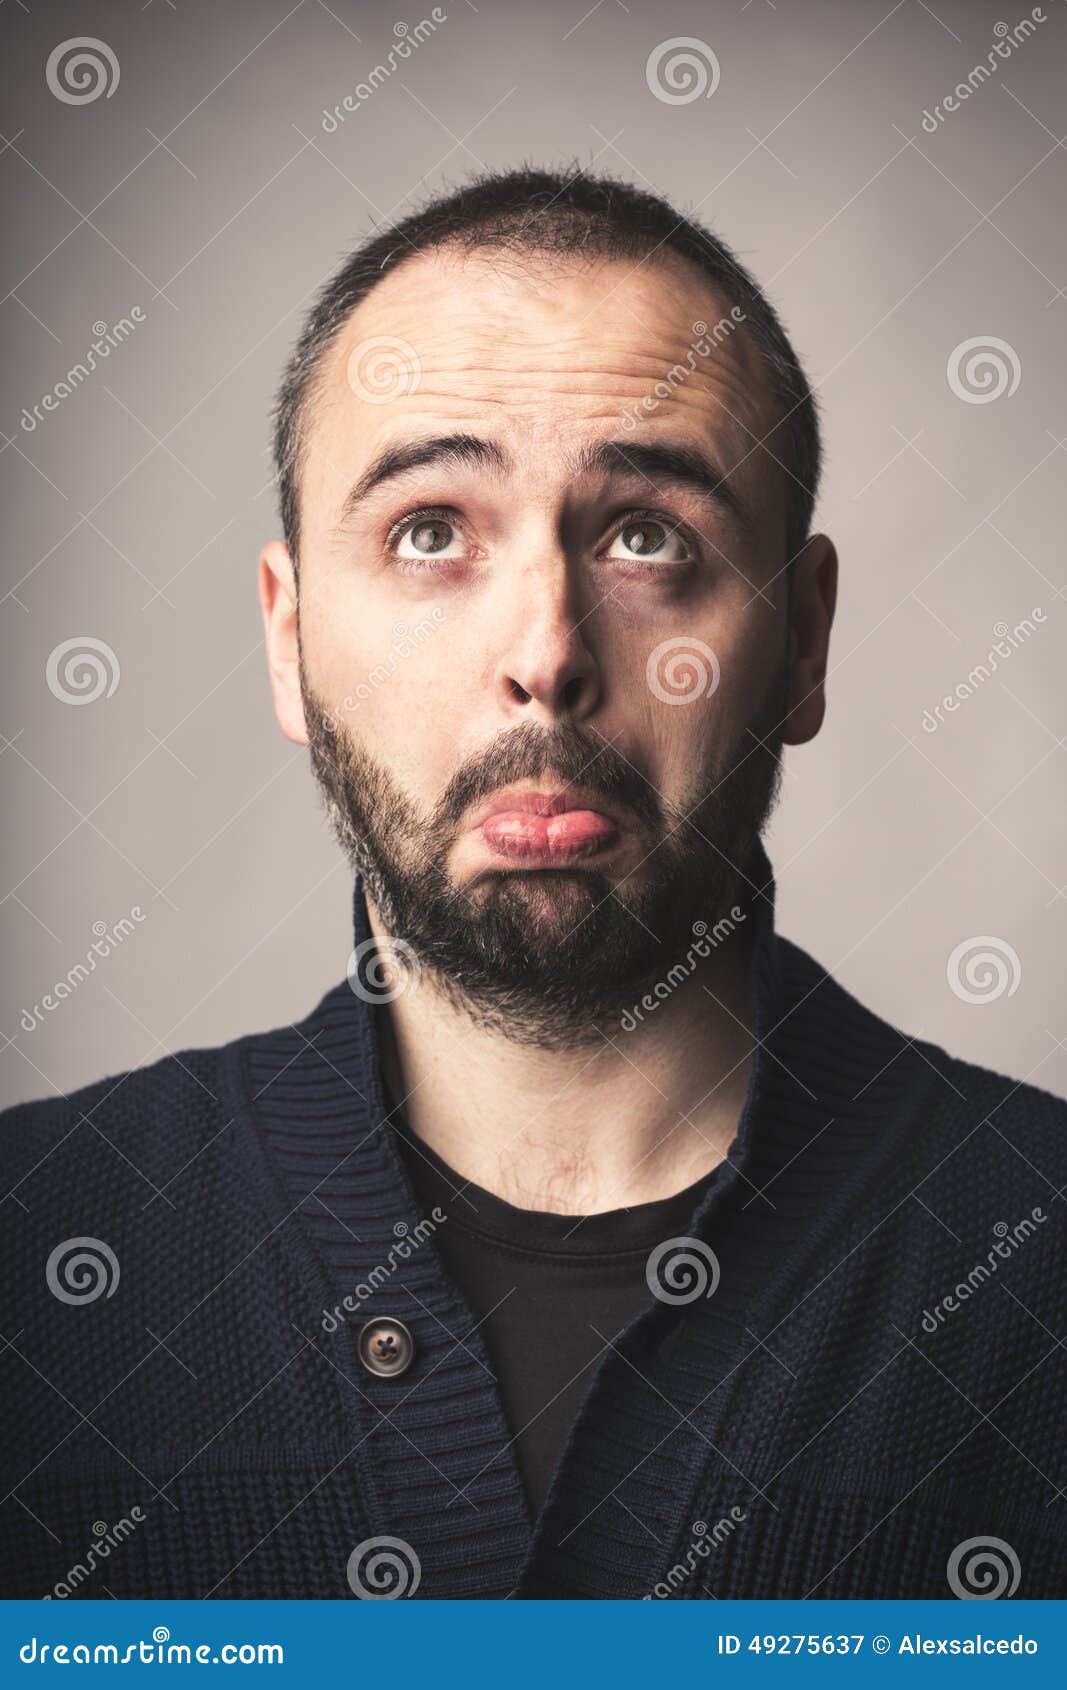 Funny face stock image. Image of studio, clever, portrait - 49275637